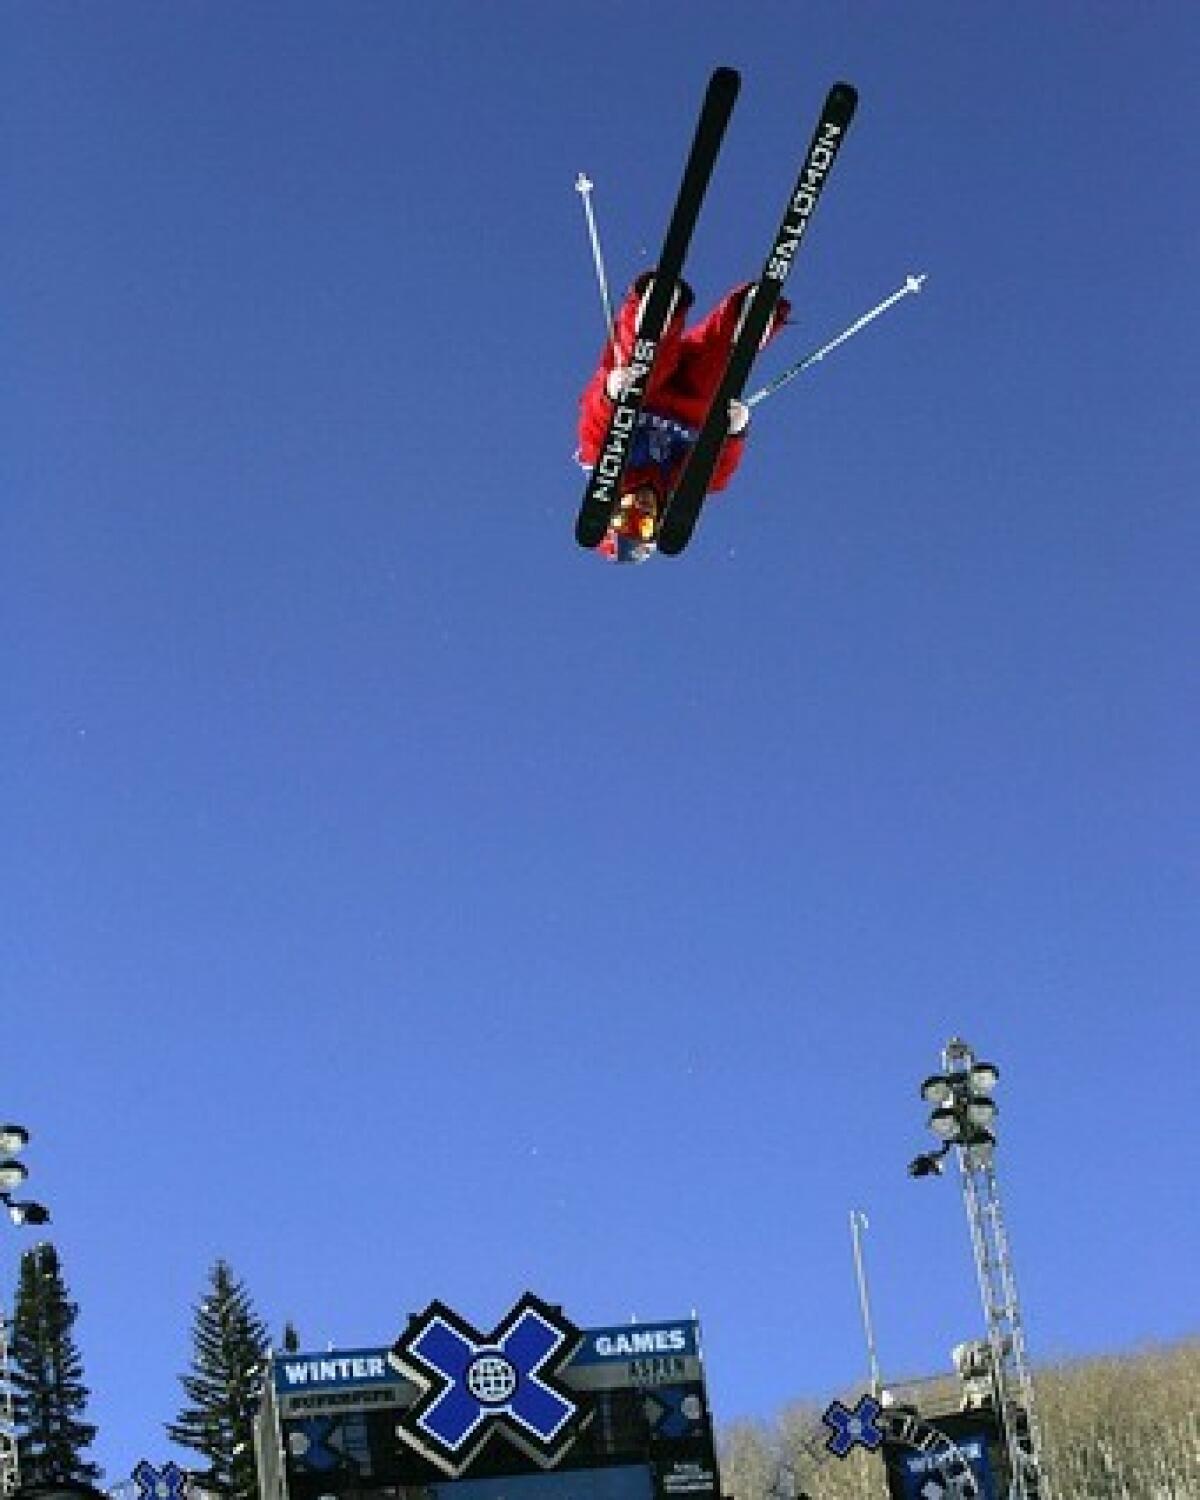 Simon Dumont of Bethel, Maine, flies in the air looking through his skis in the Skiing SuperPipe.